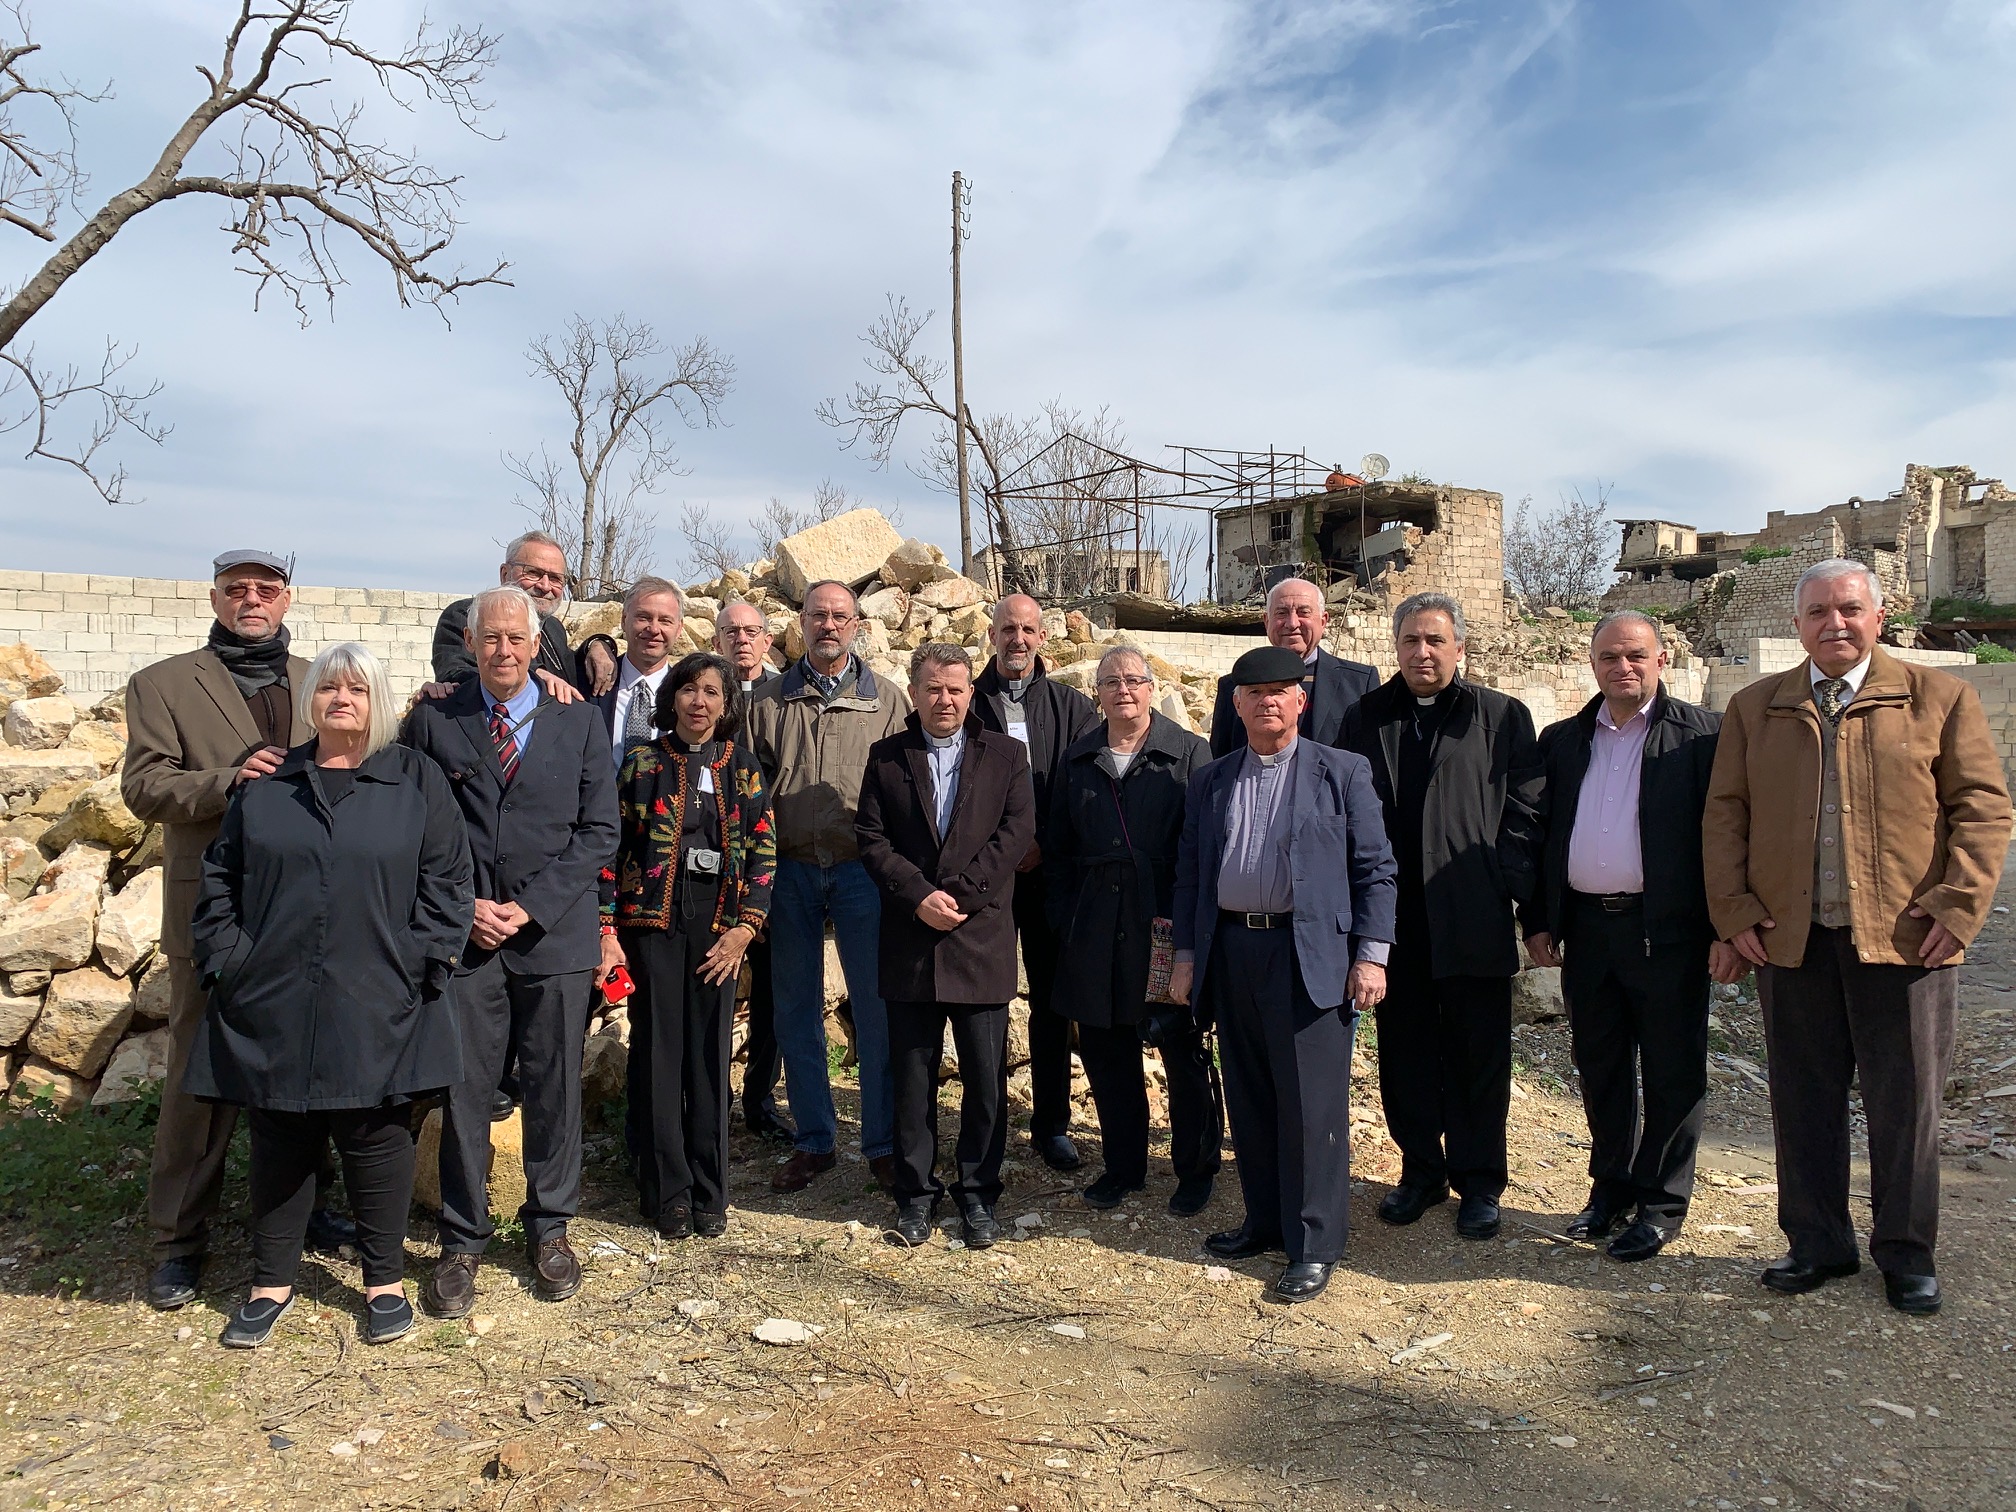  Outreach team with Rev. Nseir and elders of the Aleppo church standing in the rubble of the original church destroyed in November, 2012 